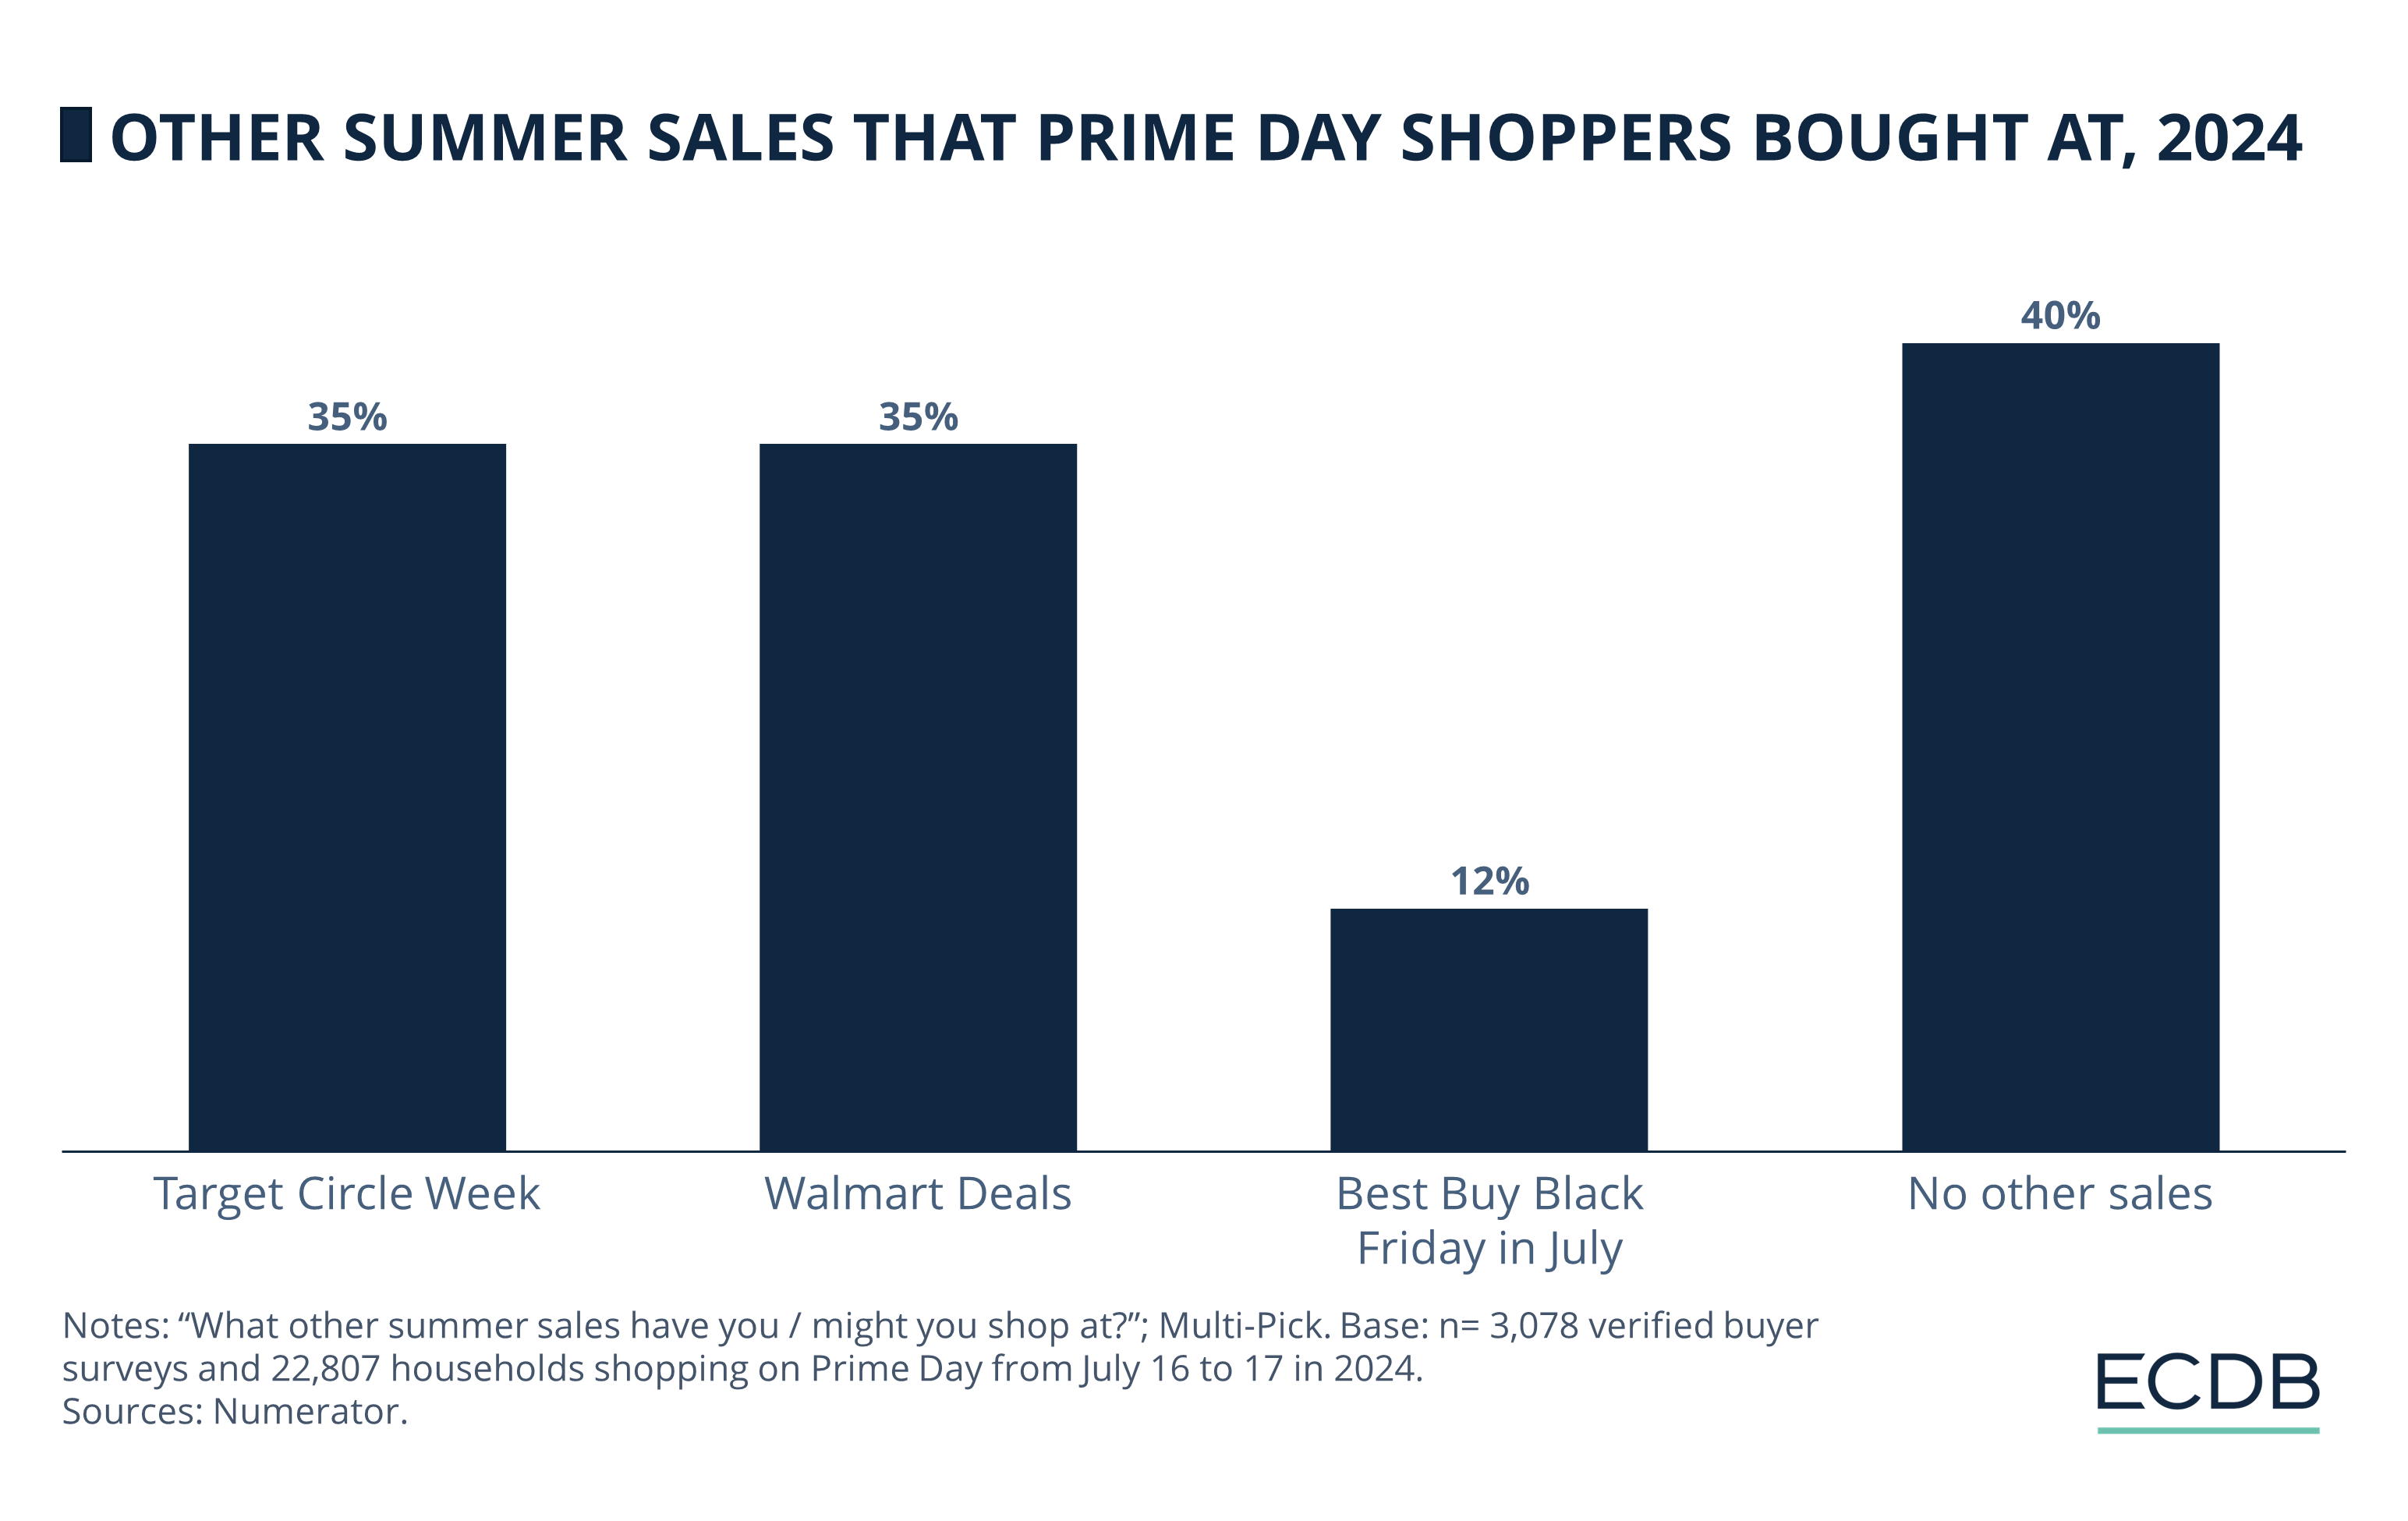 Other Summer Sales That Prime Day Shoppers Bought At, 2024